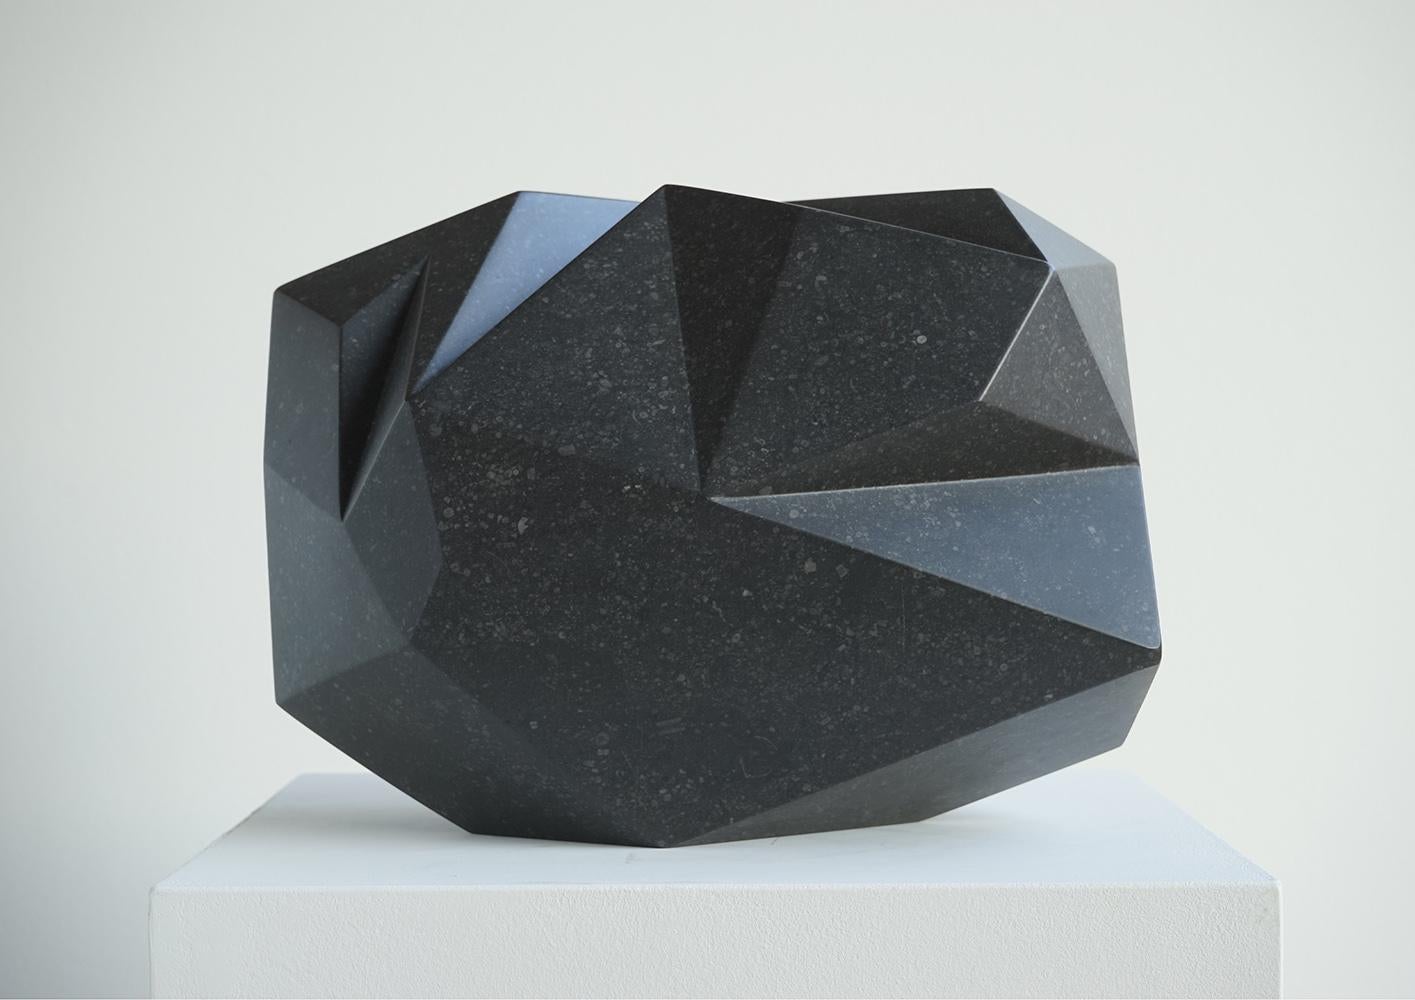 Halley 1 By Richard Perry - Abstract sculpture, Irish blue limestone, geometric For Sale 3